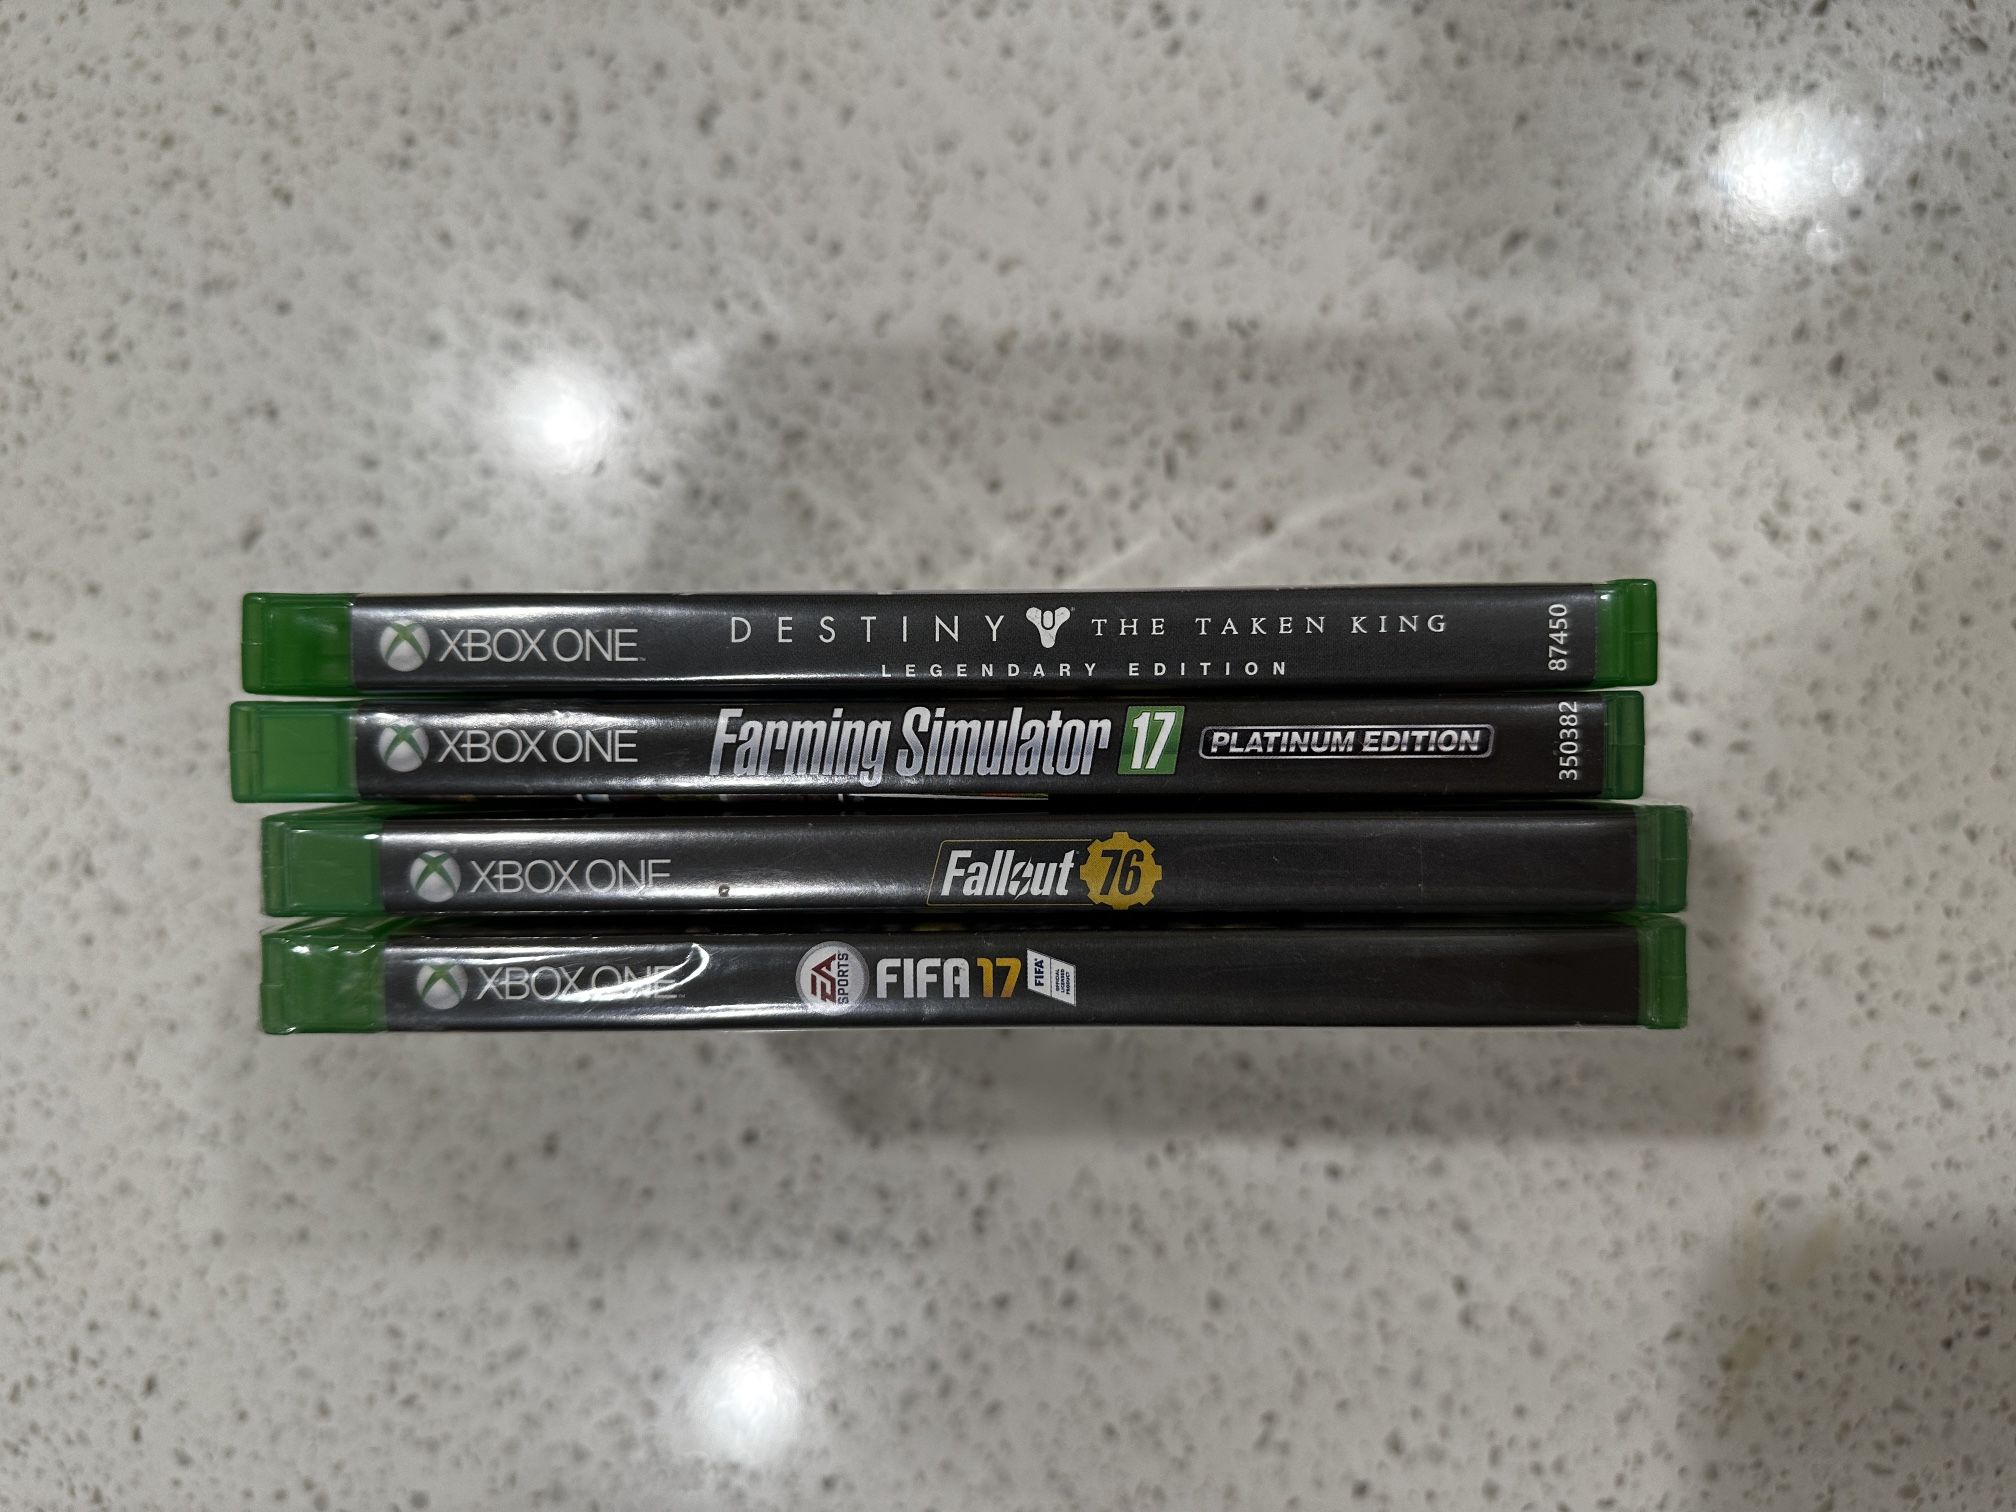 (BEST OFFER GETS IT!) Xbox One Game Lot! 